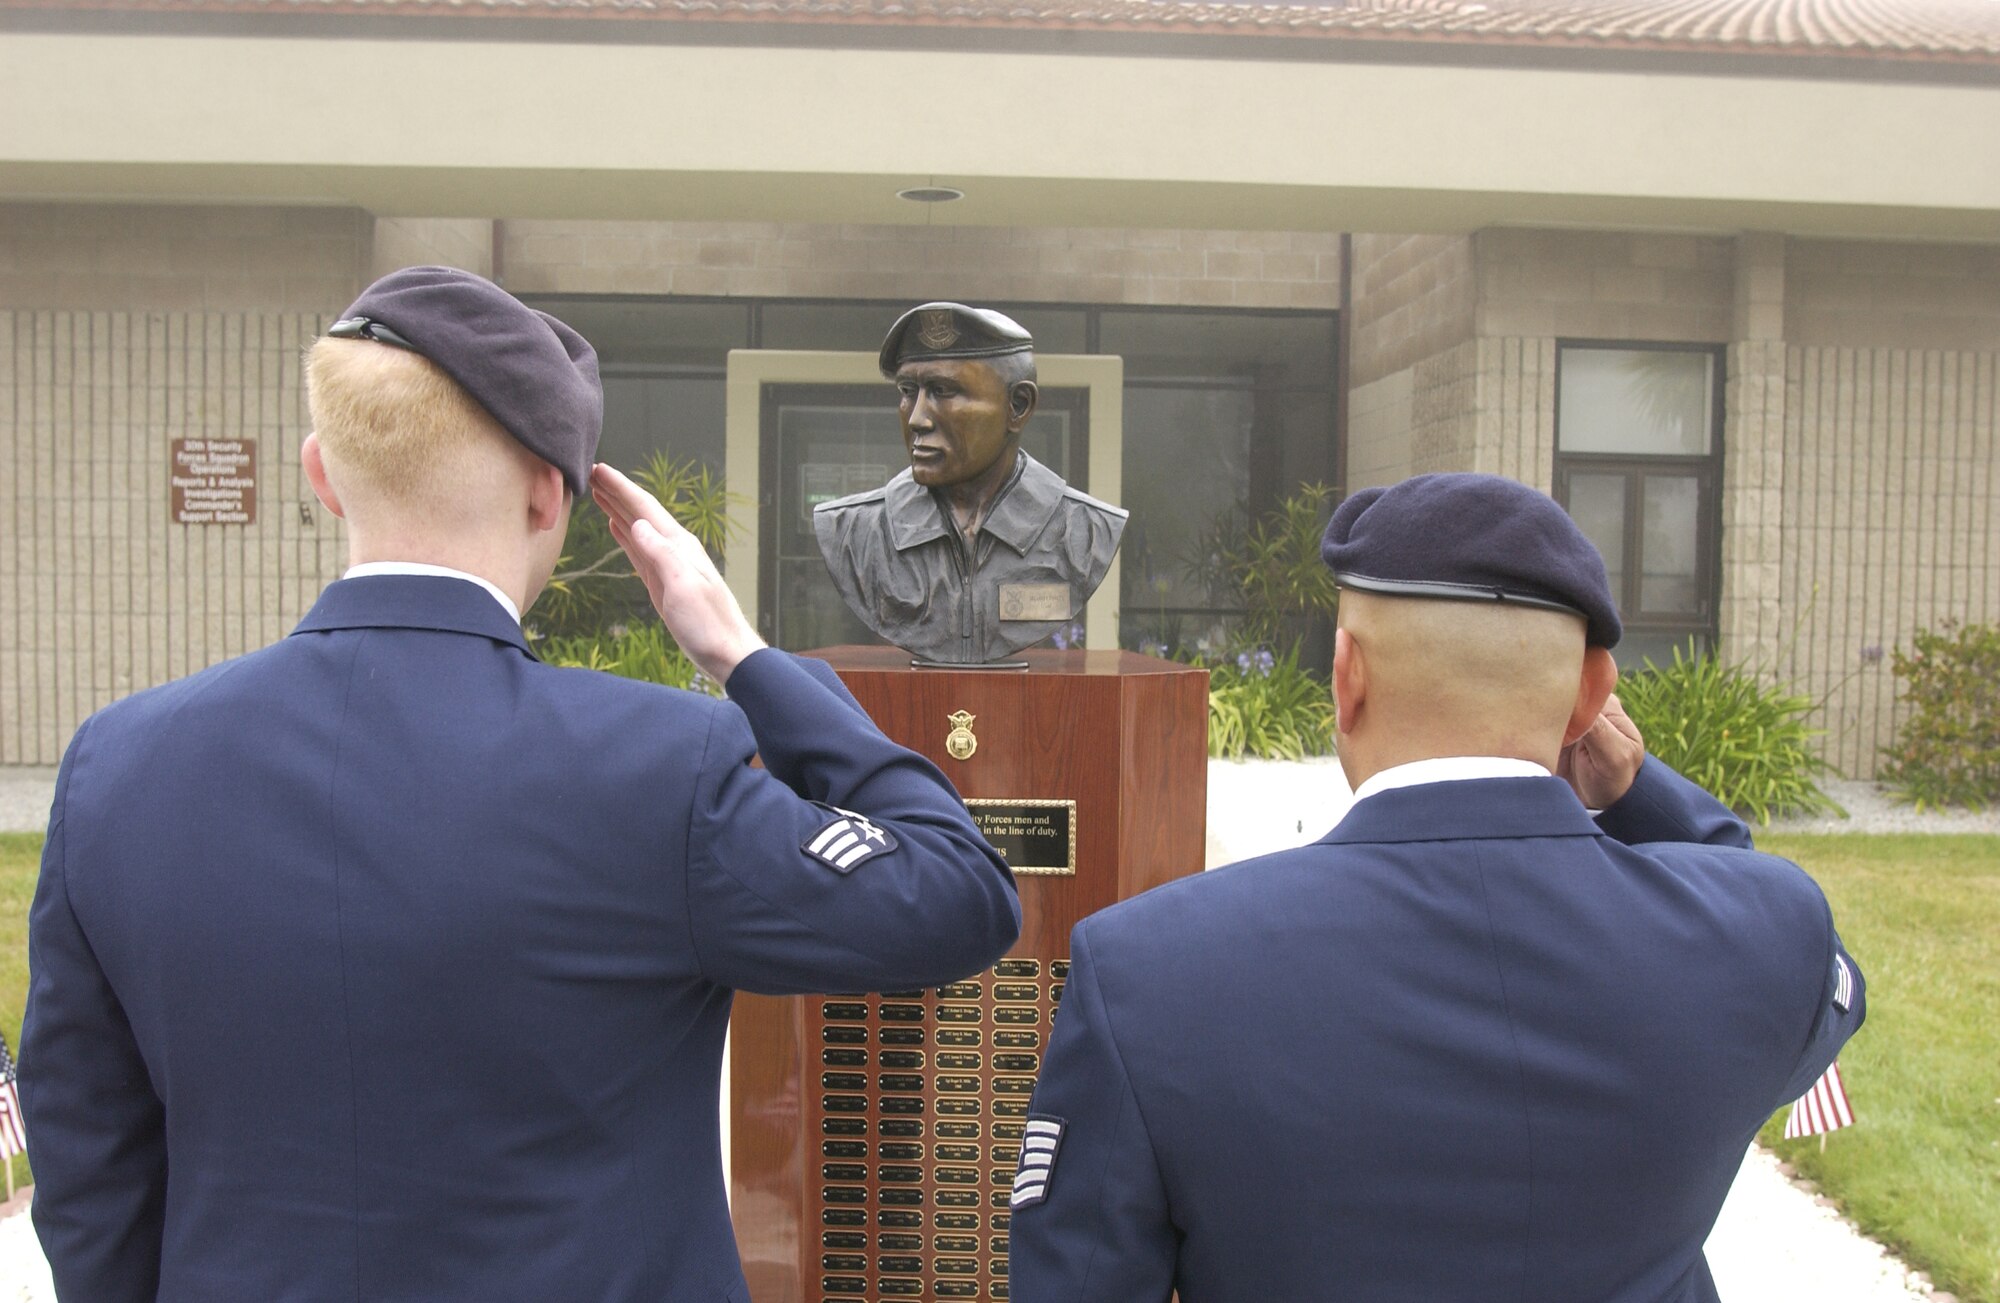 Senior Airman Donald Mace (left) and Tech. Sgt. Baltazar Ruiz (right) present arms to honor Cpl. David Williams, and Airman 1st Class Leebernard Chavis during a memorial ceremony held by the 30th Security Forces Squadron at Vandenberg on May 14. The security forces memorial reflects names of fallen Airmen in the security forces career field who were killed in the line of duty. (U.S. Air Force photo by Airman 1st Class Adam Guy)